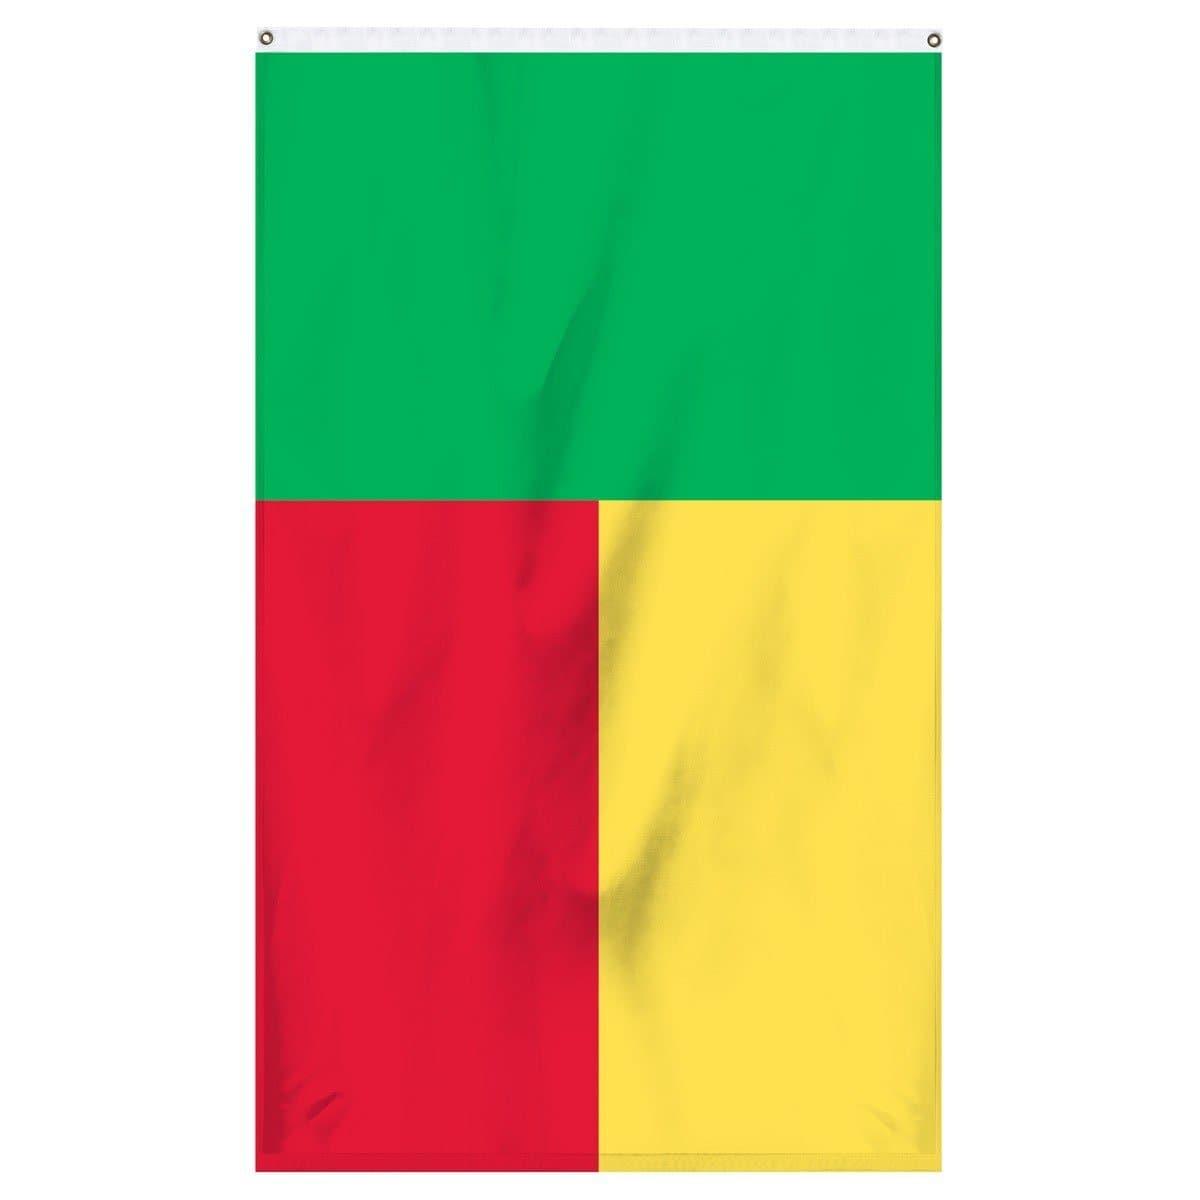 The official national flag of Benin for sale